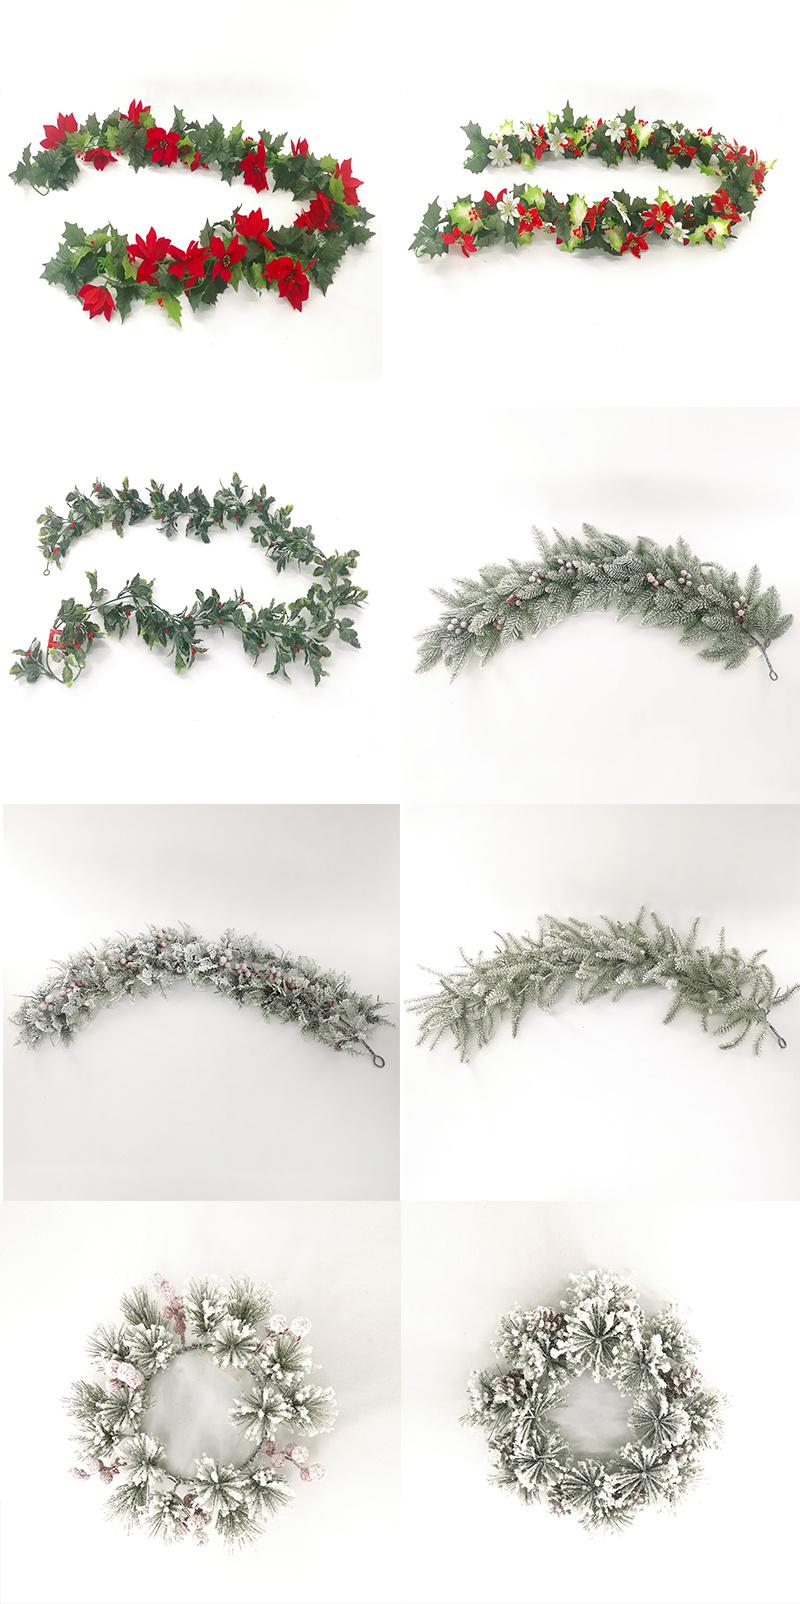 Real Looking Artificial Hanging Vine Leaves Eucalyptus Garland for Wedding Decor